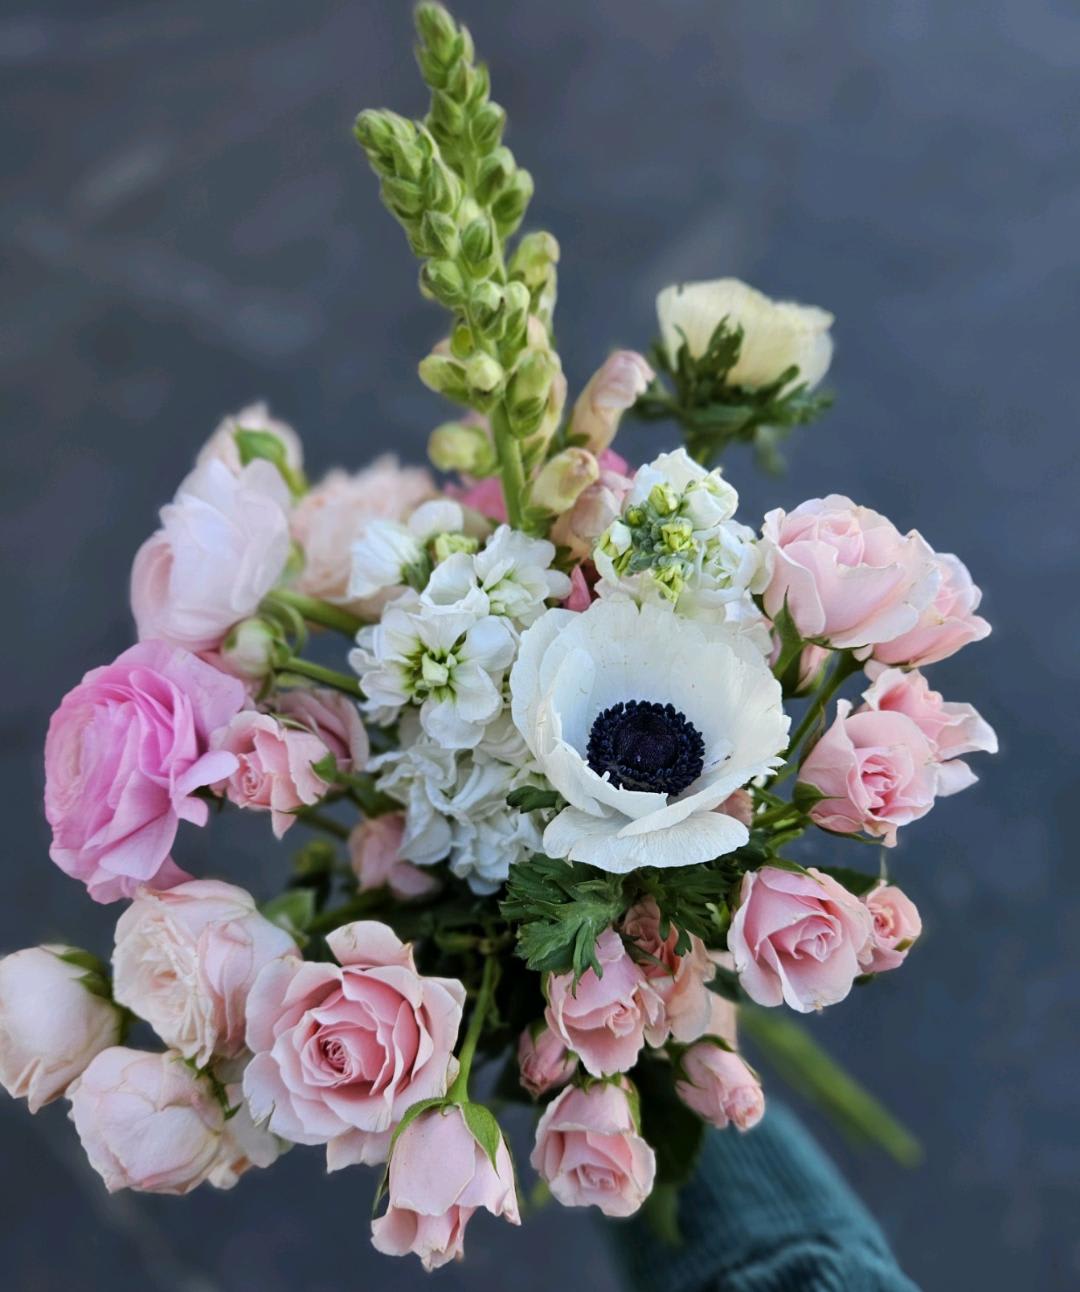 Designer's Choice Pastel Tones  - Vased designer's choice arrangement of our freshest blooms in pastel tones. NOTE!! Flowers pictured here for color example, these specific flowers won't necessarily be used in arrangement.